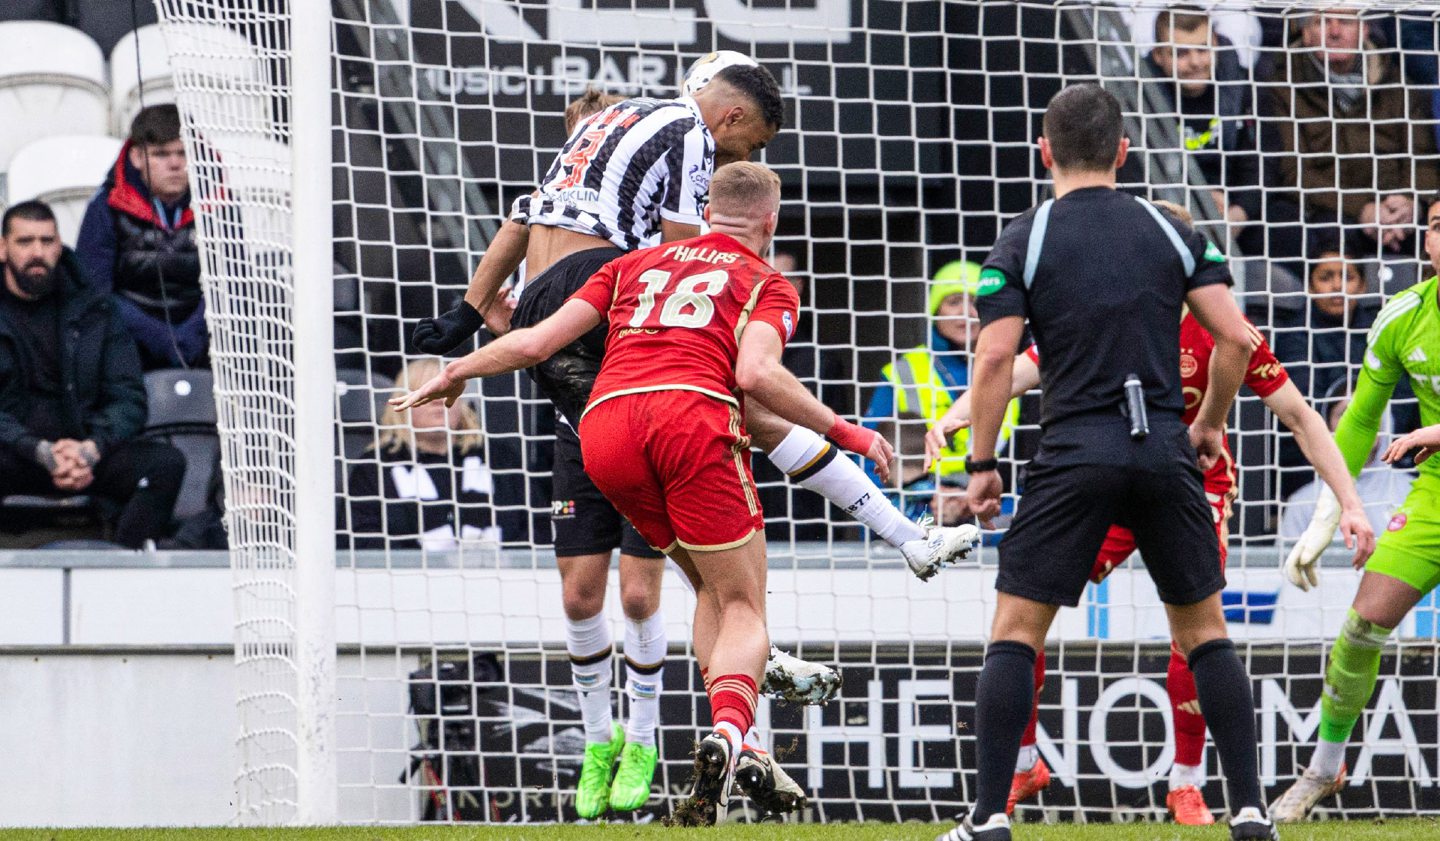 St Mirren's Mikael Mandron and Aberdeen's Killian Phillips in action. Image: SNS